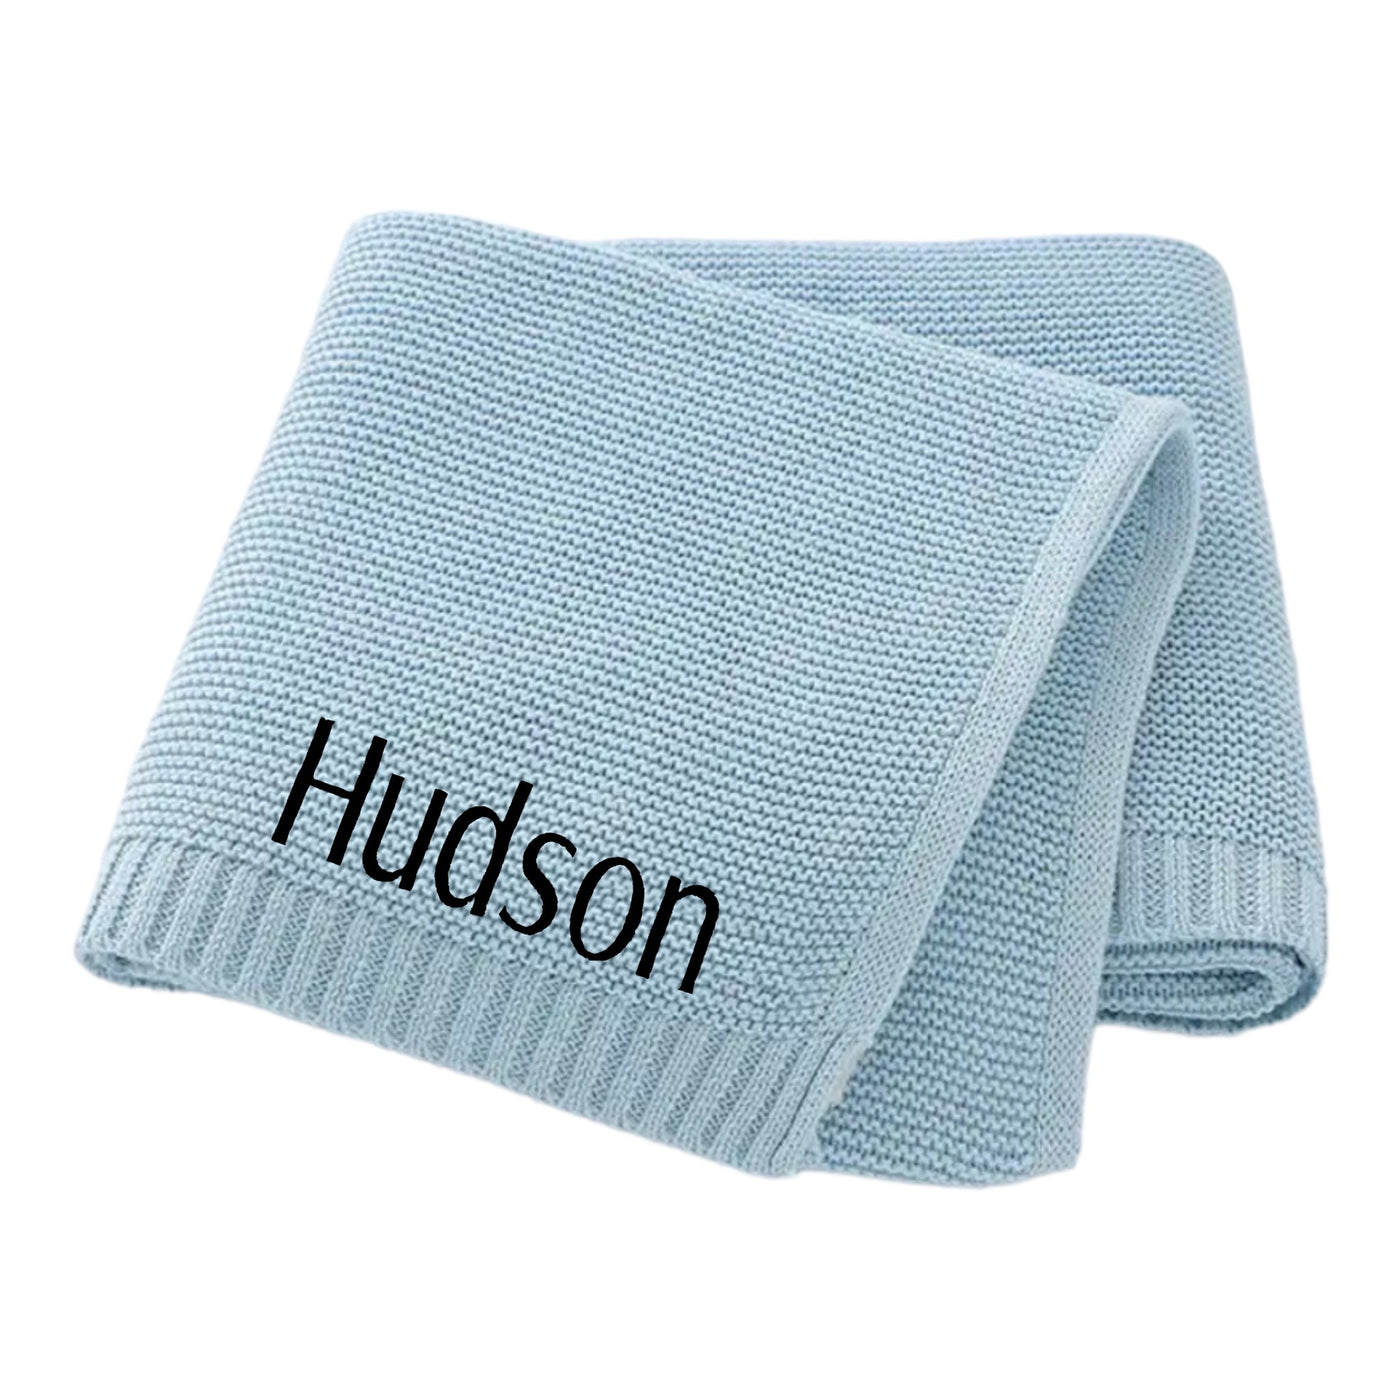 PERSONALISED BABY COTTON KNITTED BLANKET LIGHT BLUE